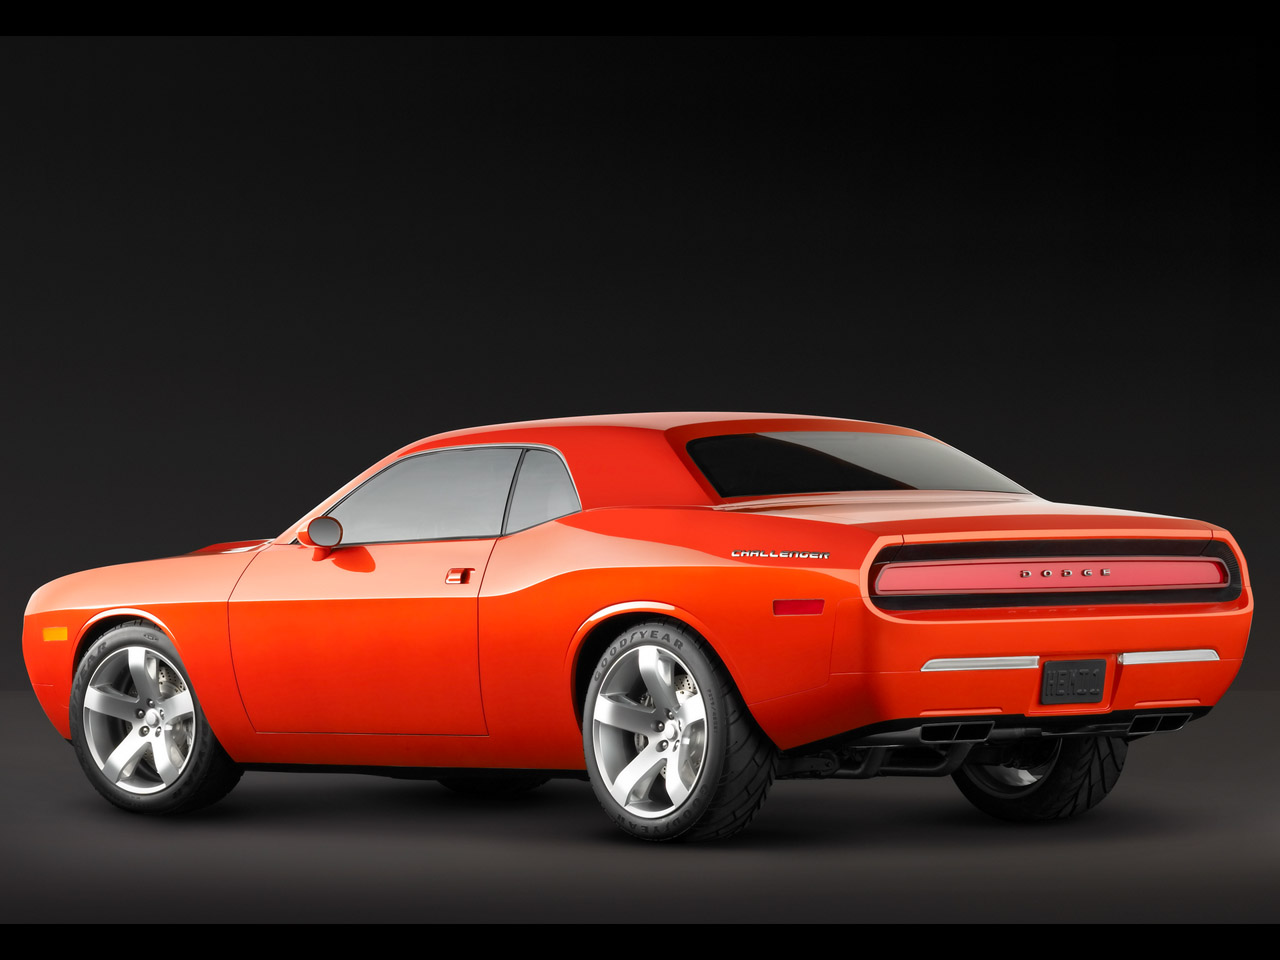 2006 Dodge Challenger Concept - Rear Angle - 1280x960 Wallpaper